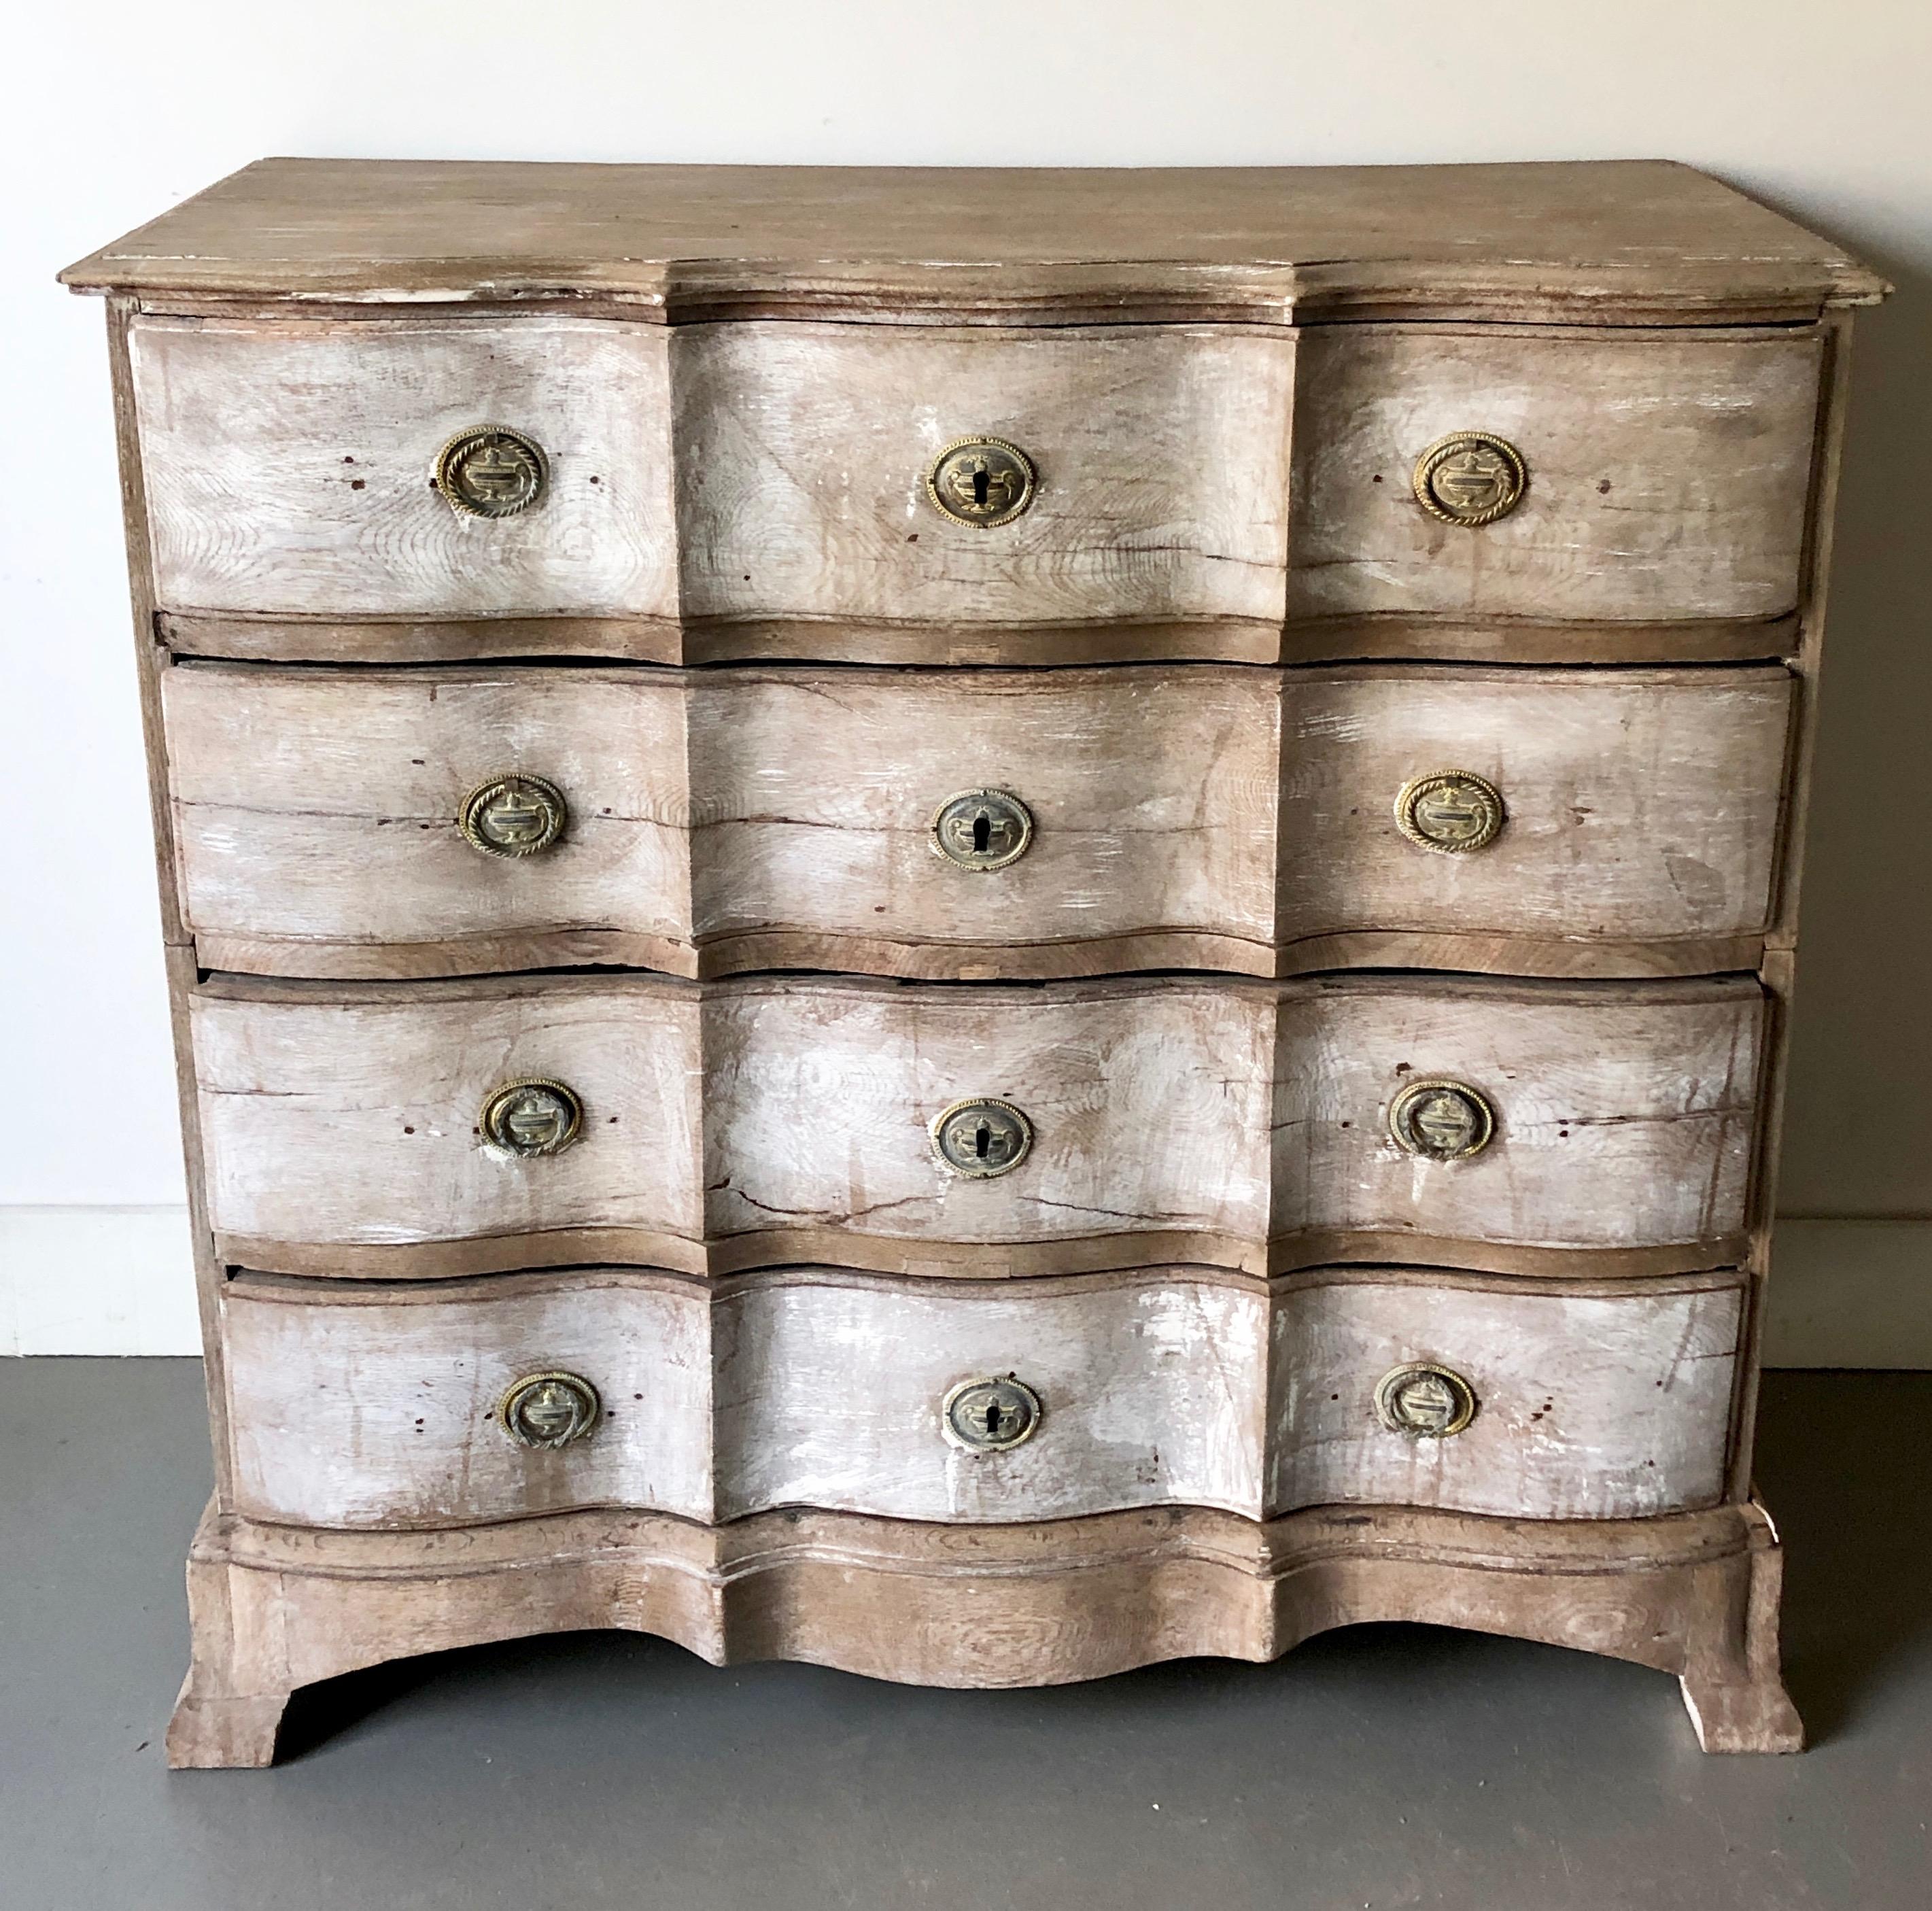 An exceptional, very large 19th century Danish serpentine front chest in bleached oak with some fragment white paint. Beautifully carved serpentine drawers with original handsome bronze escutcheons. The chest is in two parts for convent